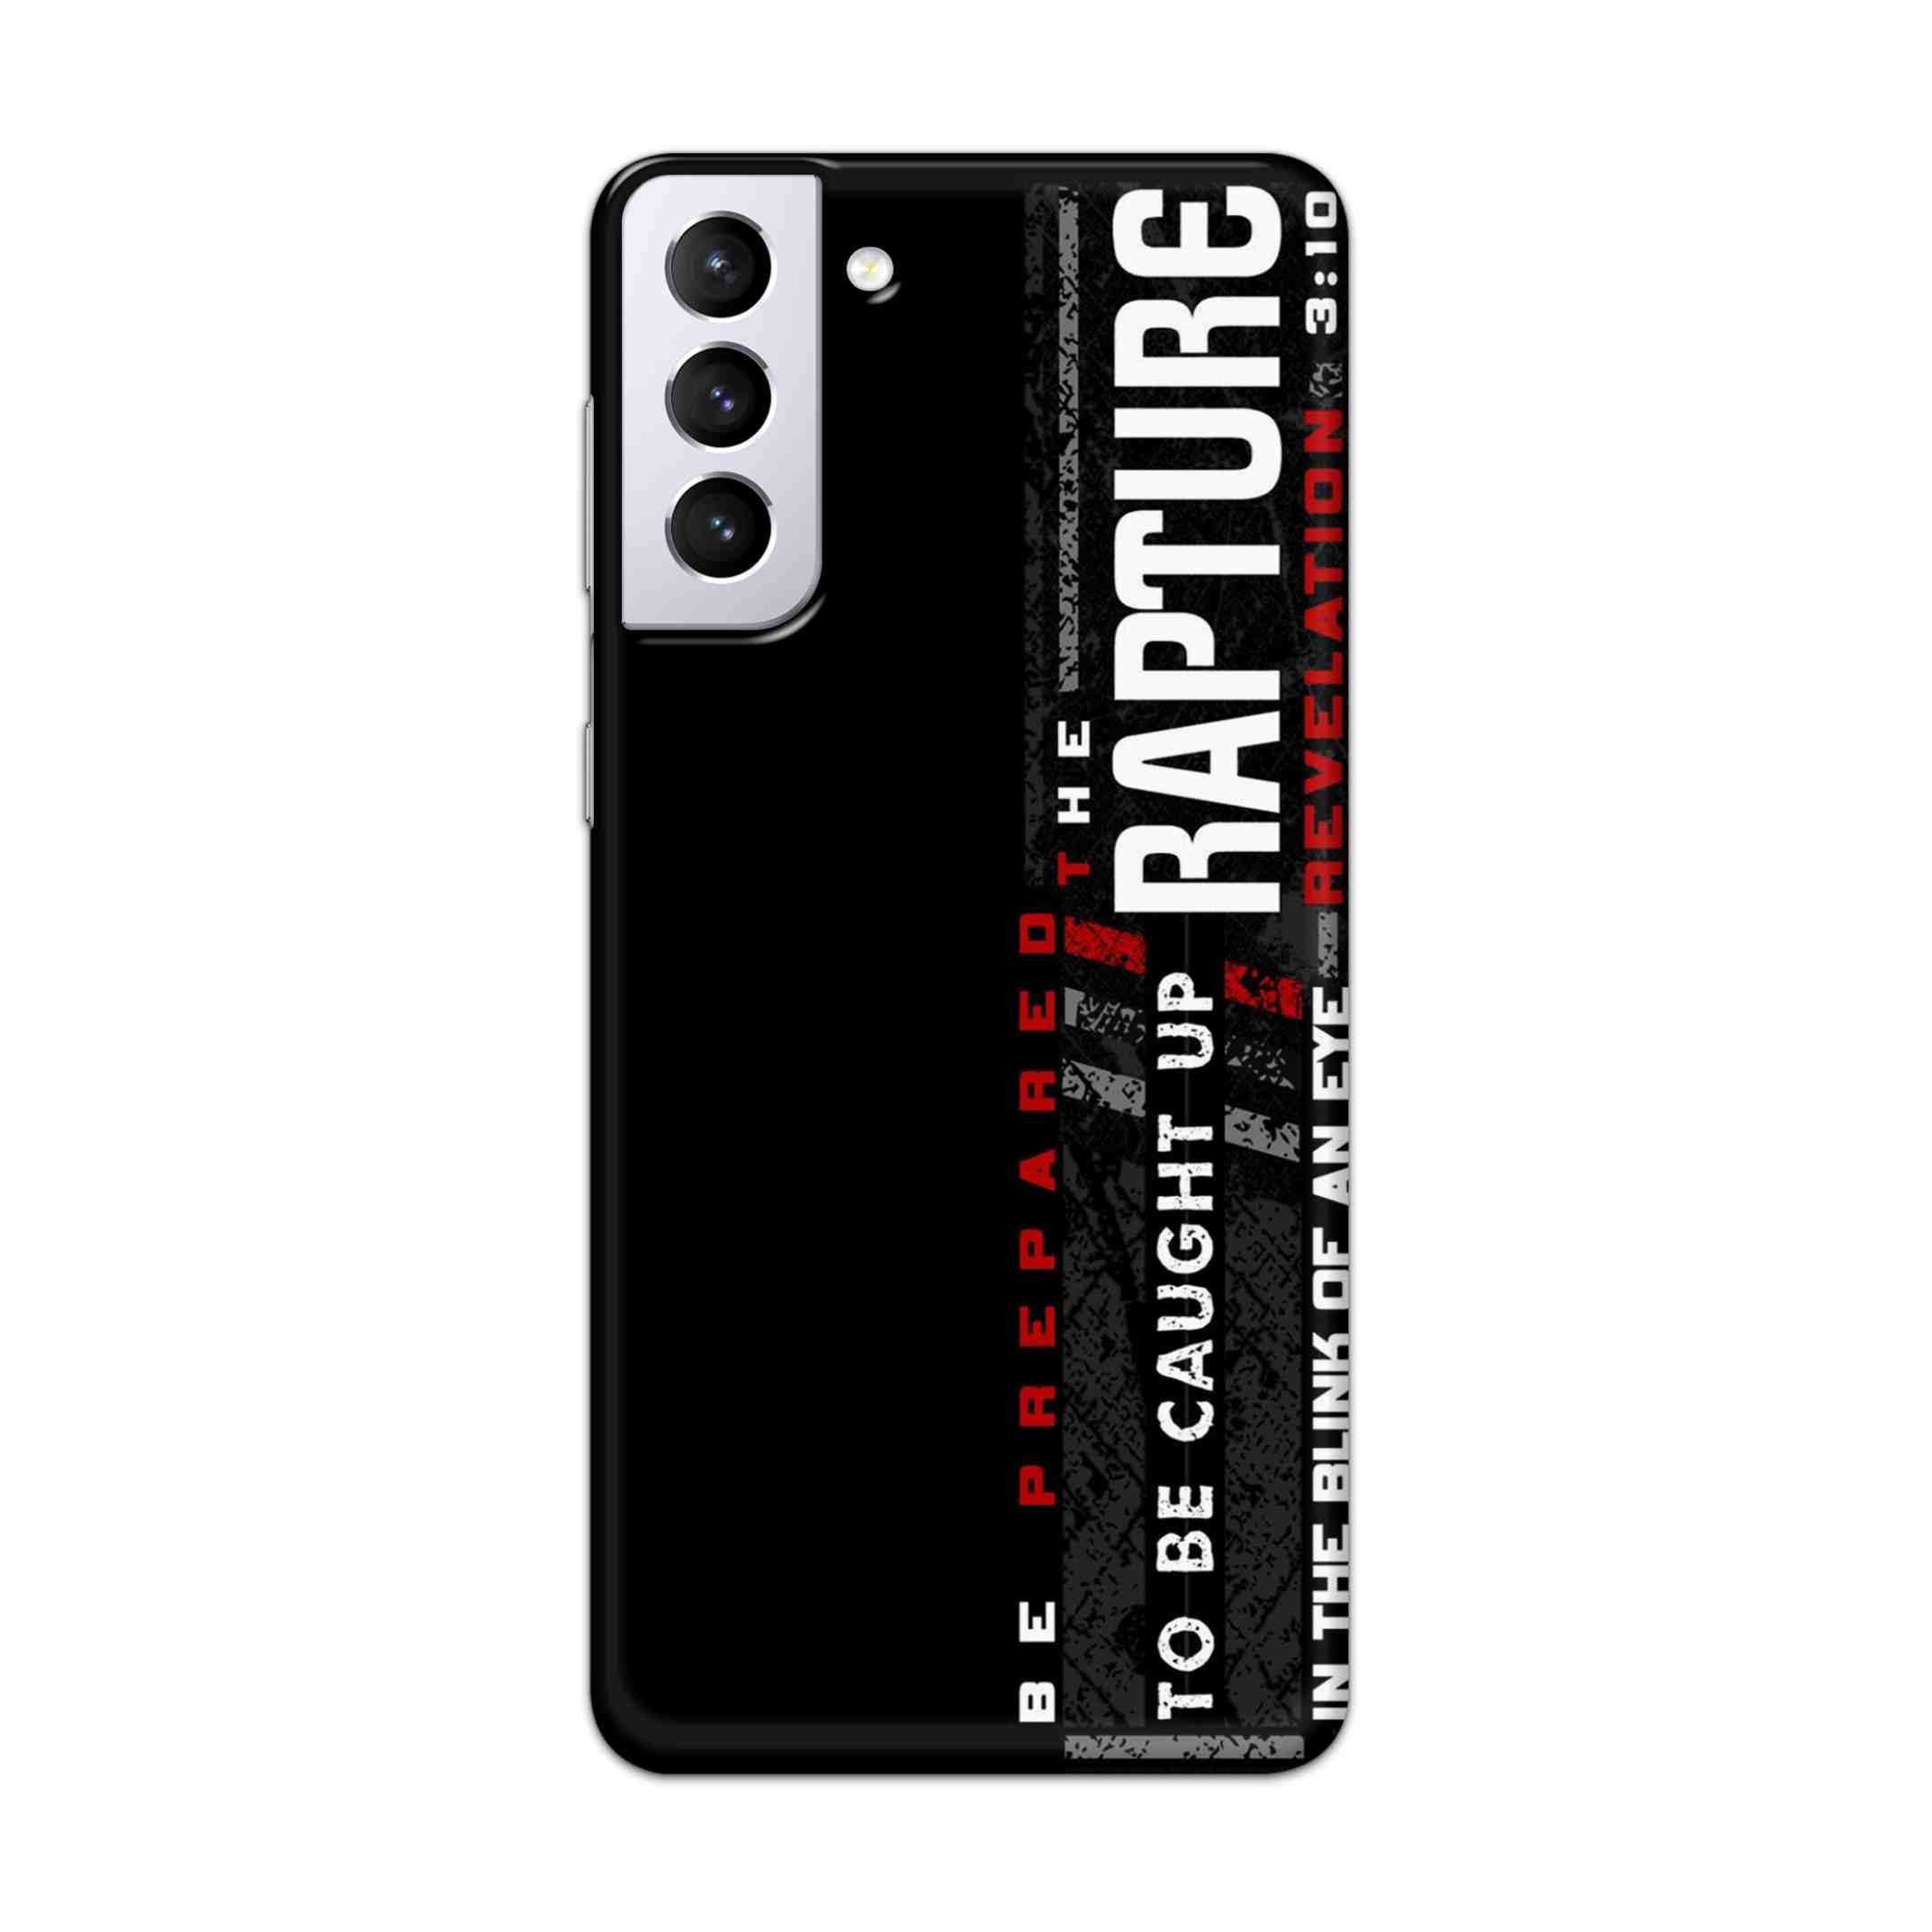 Buy Rapture Hard Back Mobile Phone Case Cover For Samsung Galaxy S21 Online